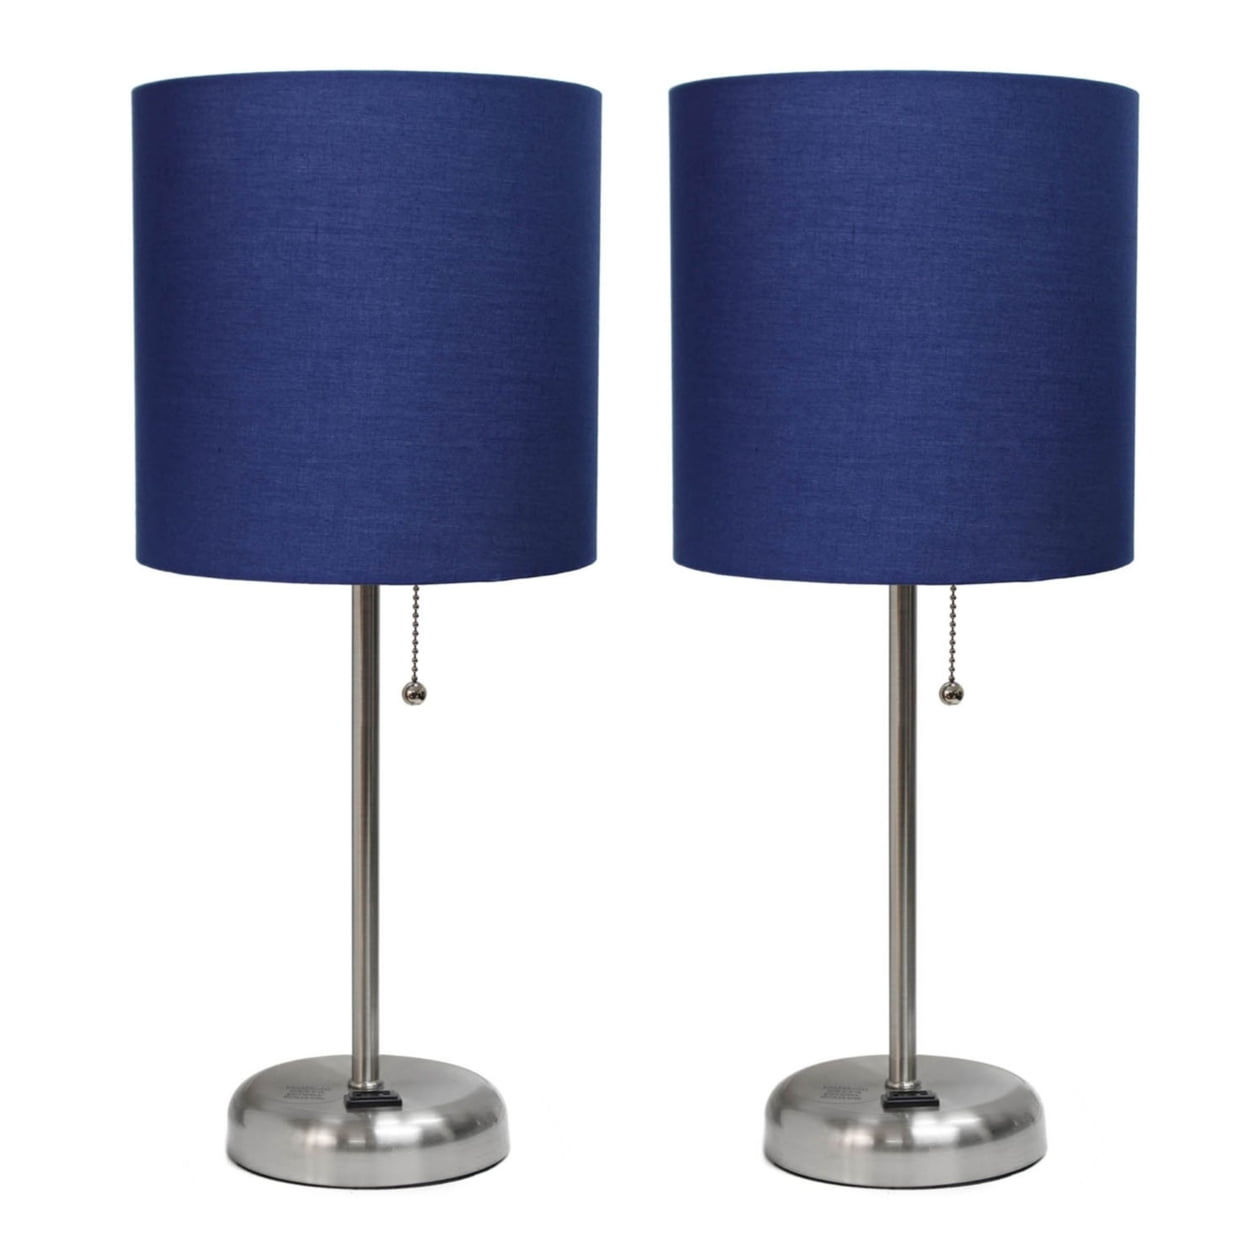 Lc2001-nav-2pk Brushed Steel Stick Table Lamp With Charging Outlet & Fabric Shade, Navy - Set Of 2